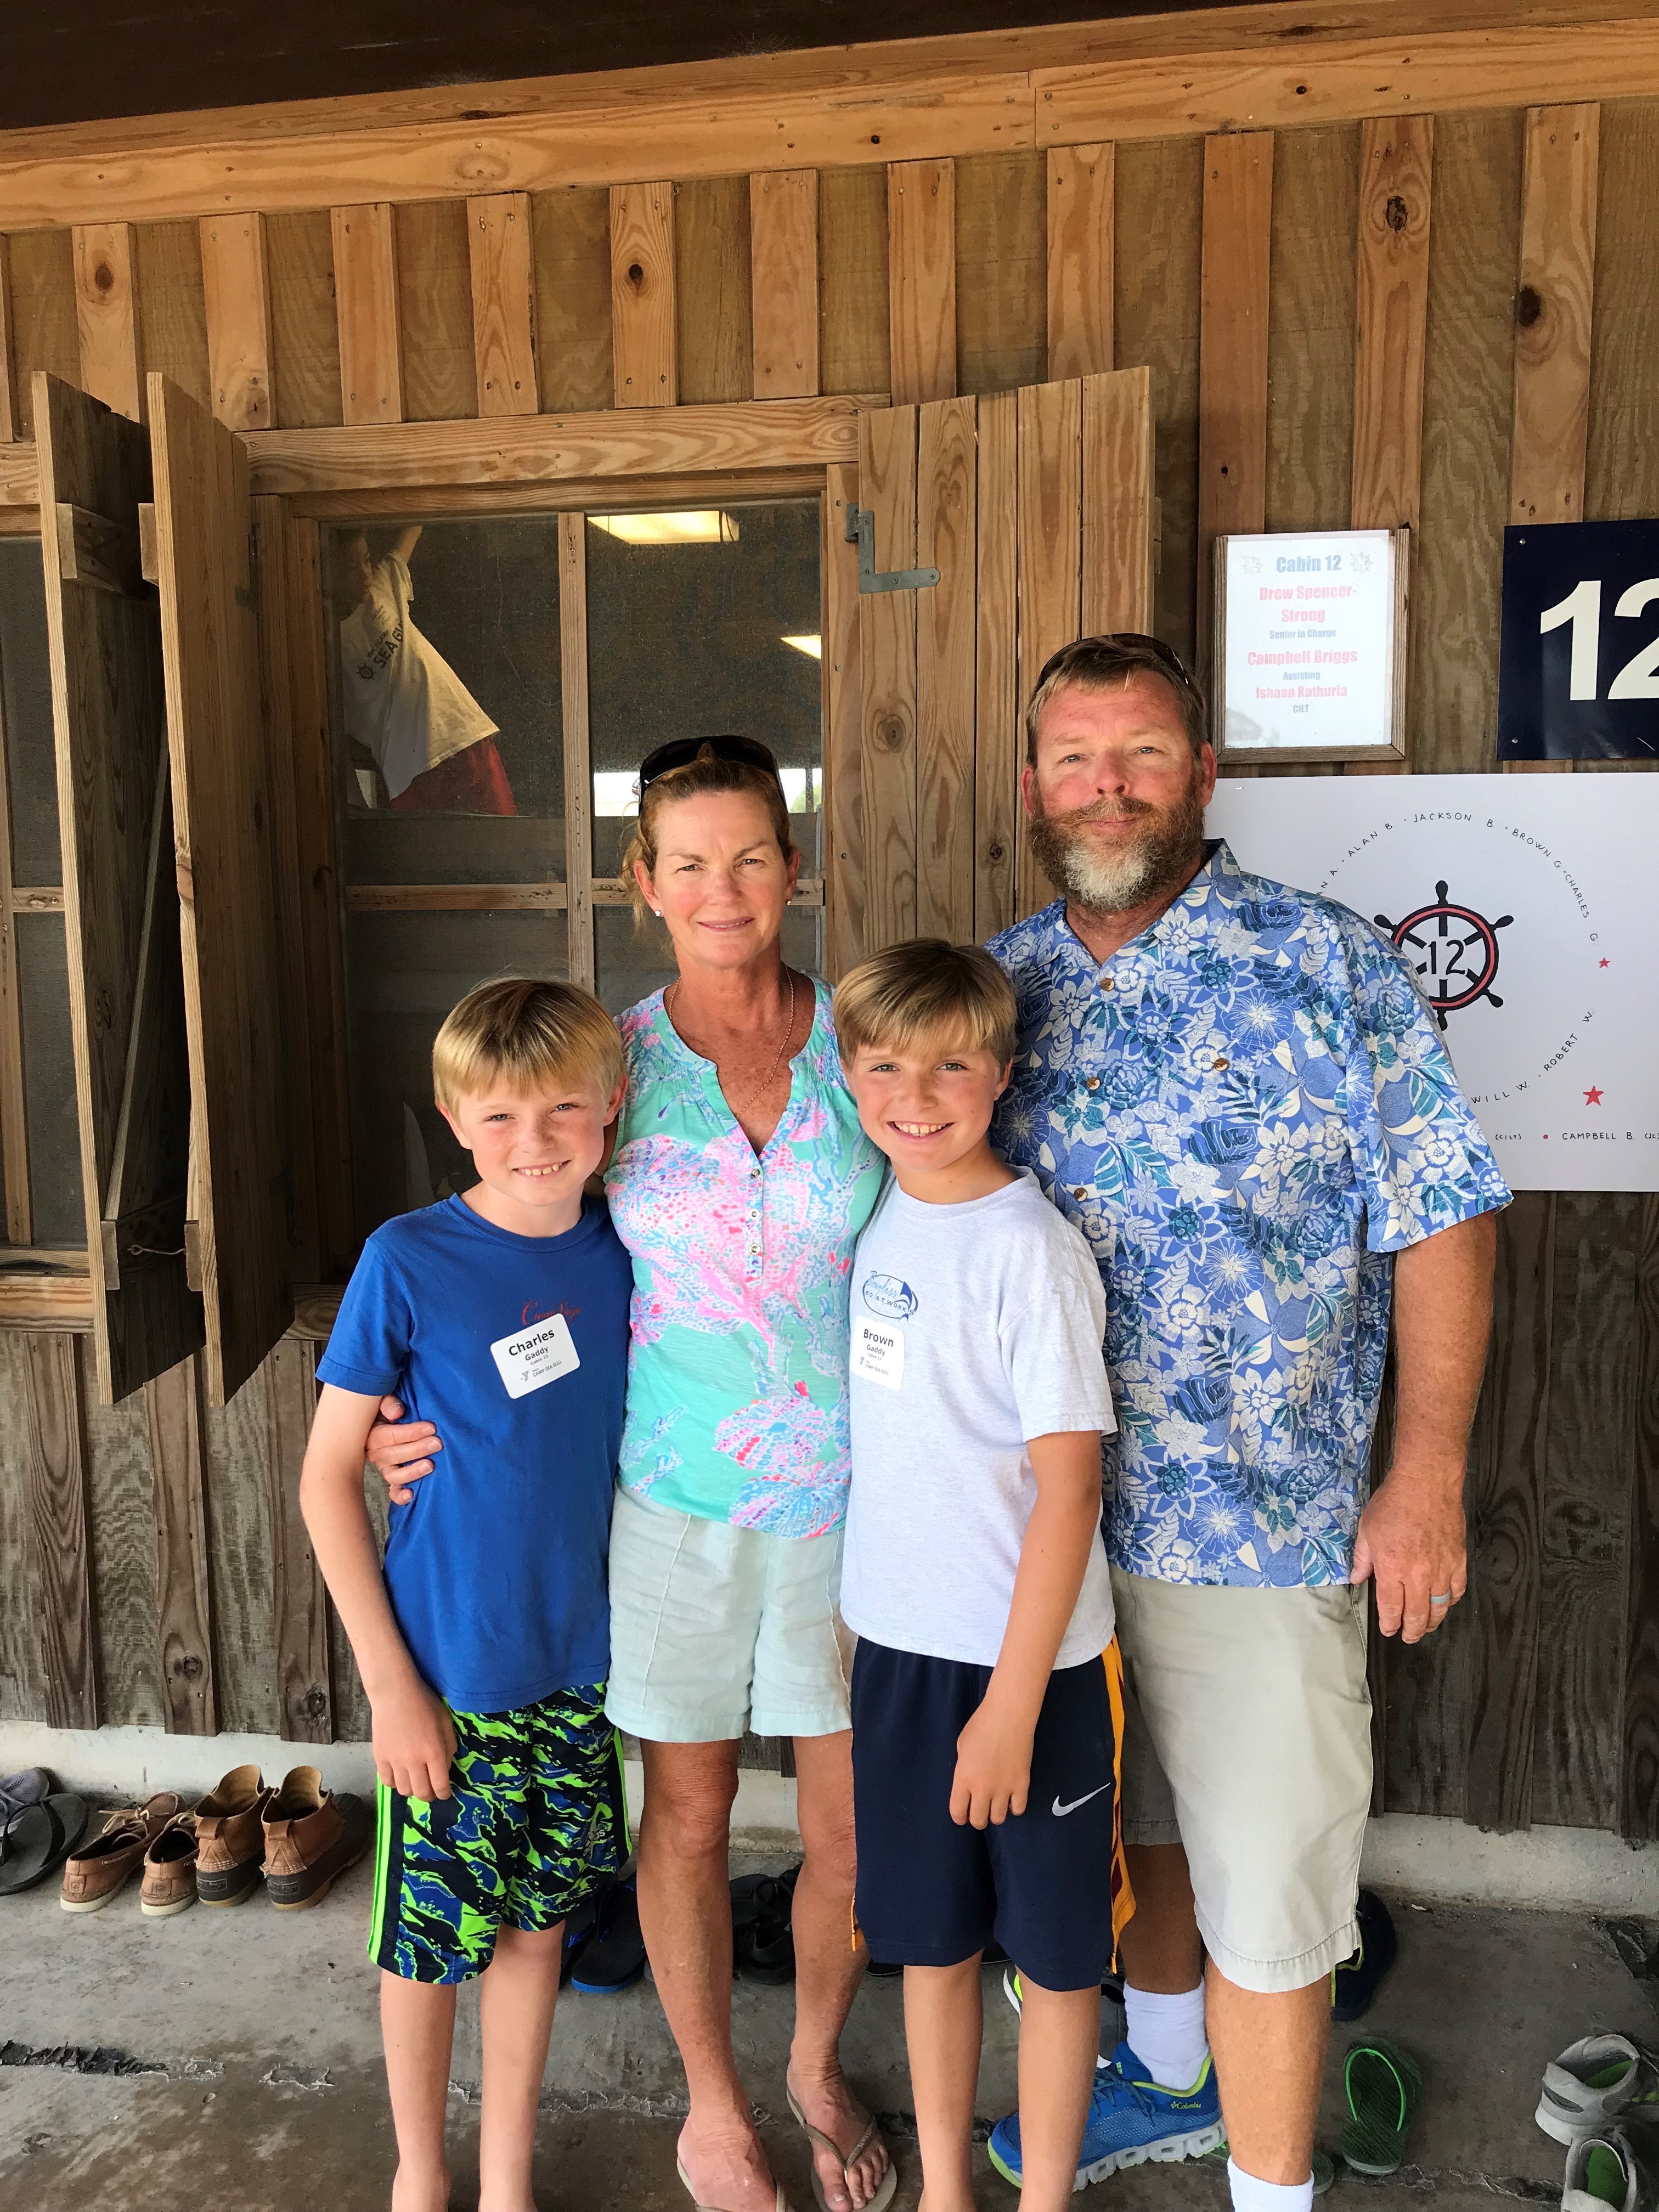 The Gaddy Family at Camp Sea Gull, summer of 2018, with their 10 year old twin boys. Left to Right: Charles, Nancy, Brown and Fin Gaddy.